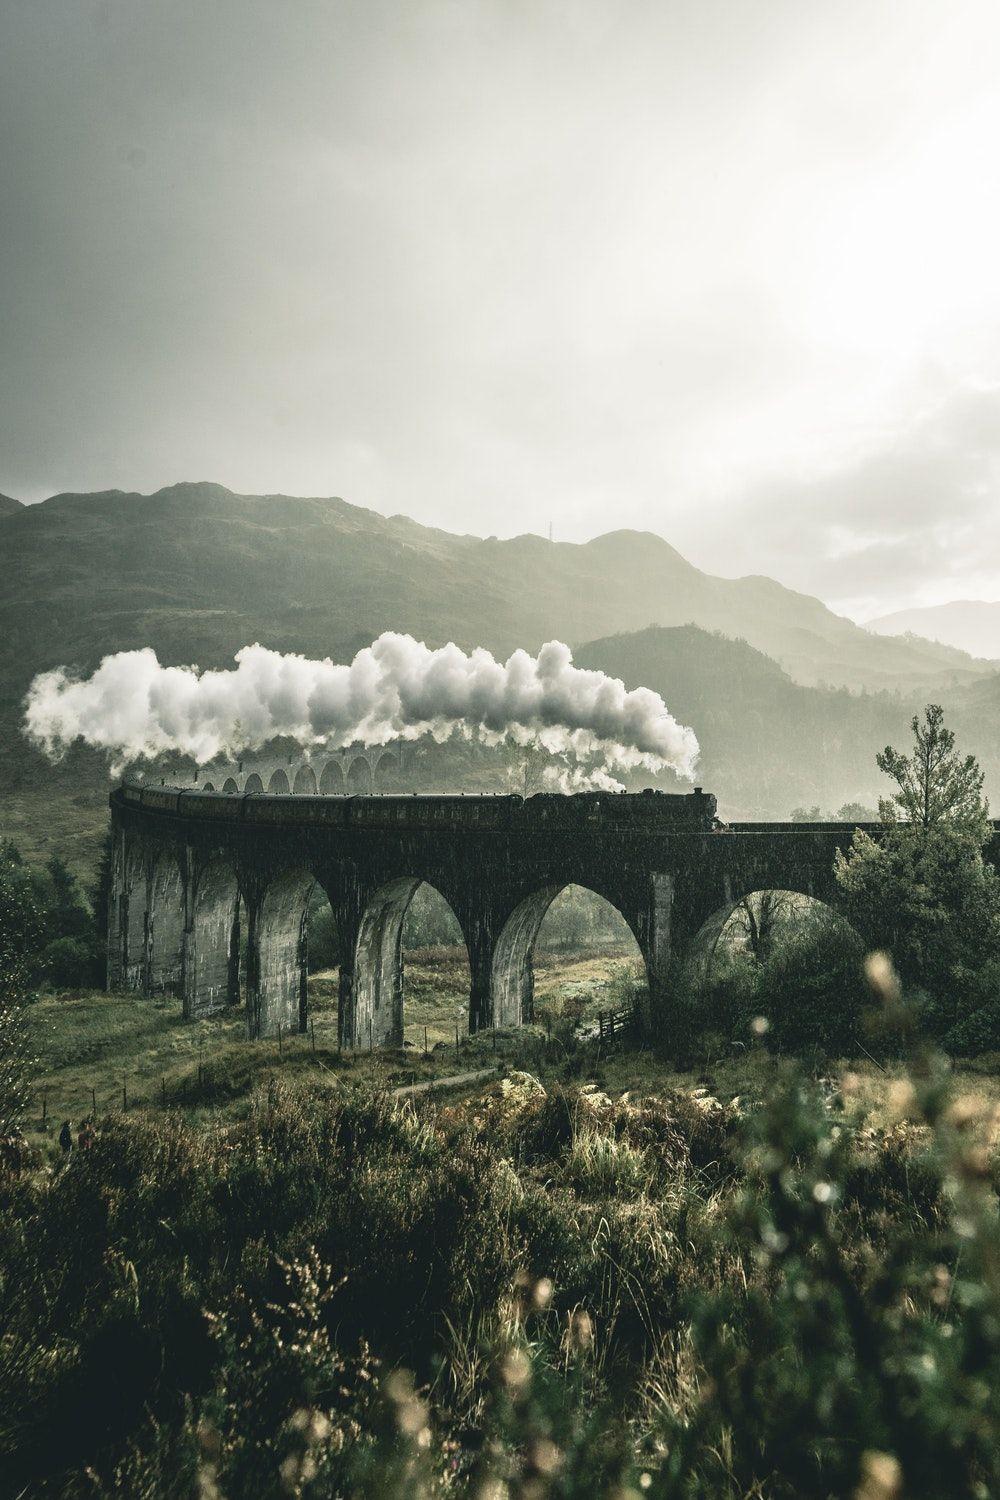 Train Picture. Download Free Image